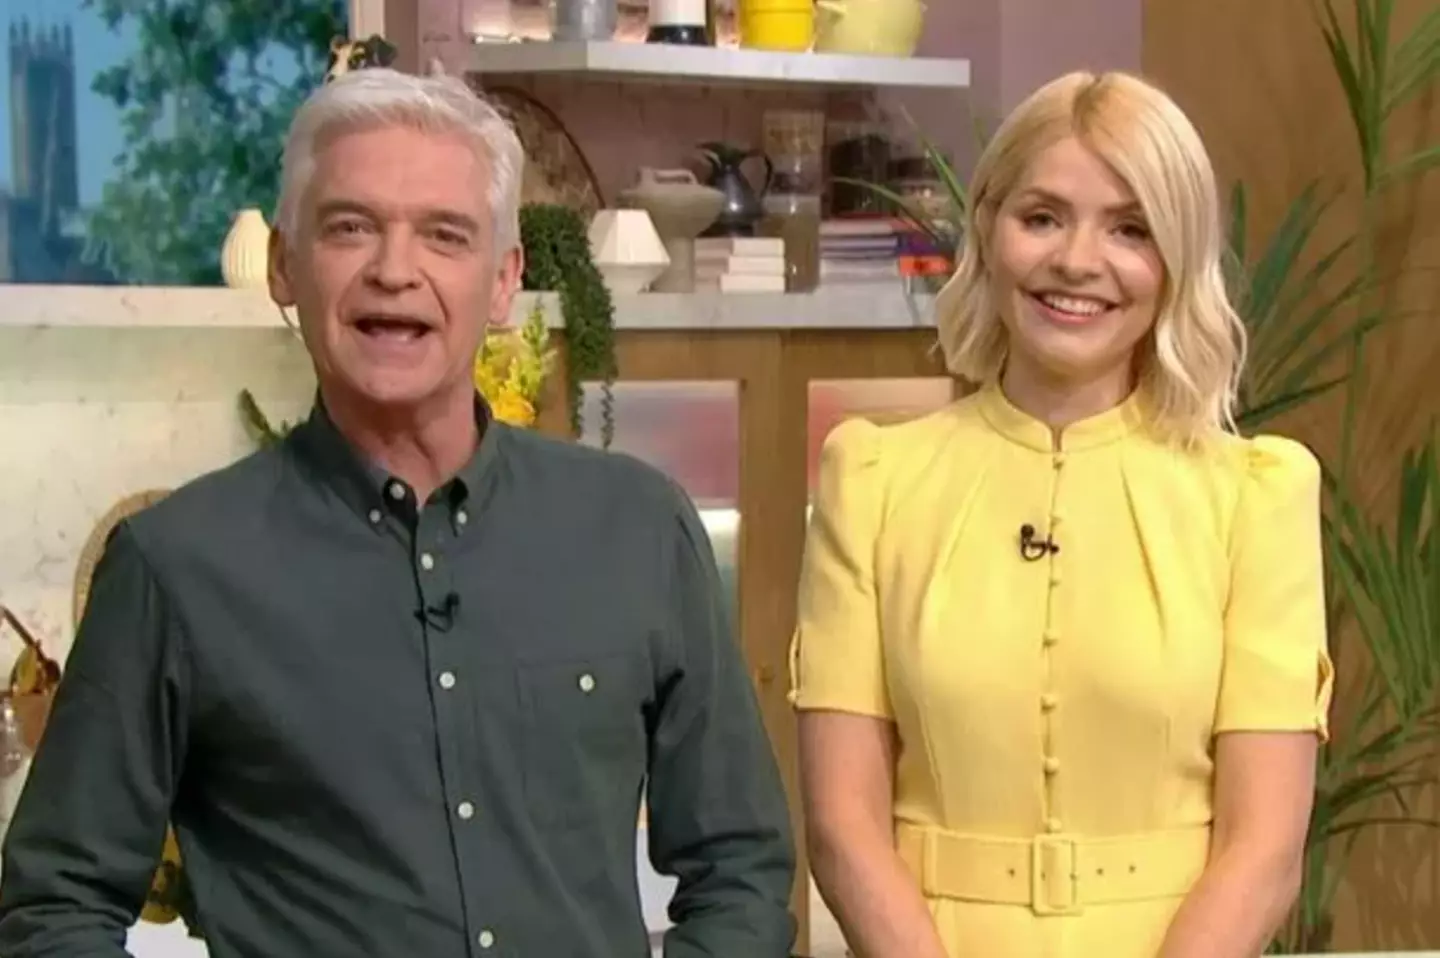 Phillip Schofield has resigned from ITV 'with immediate effect'.